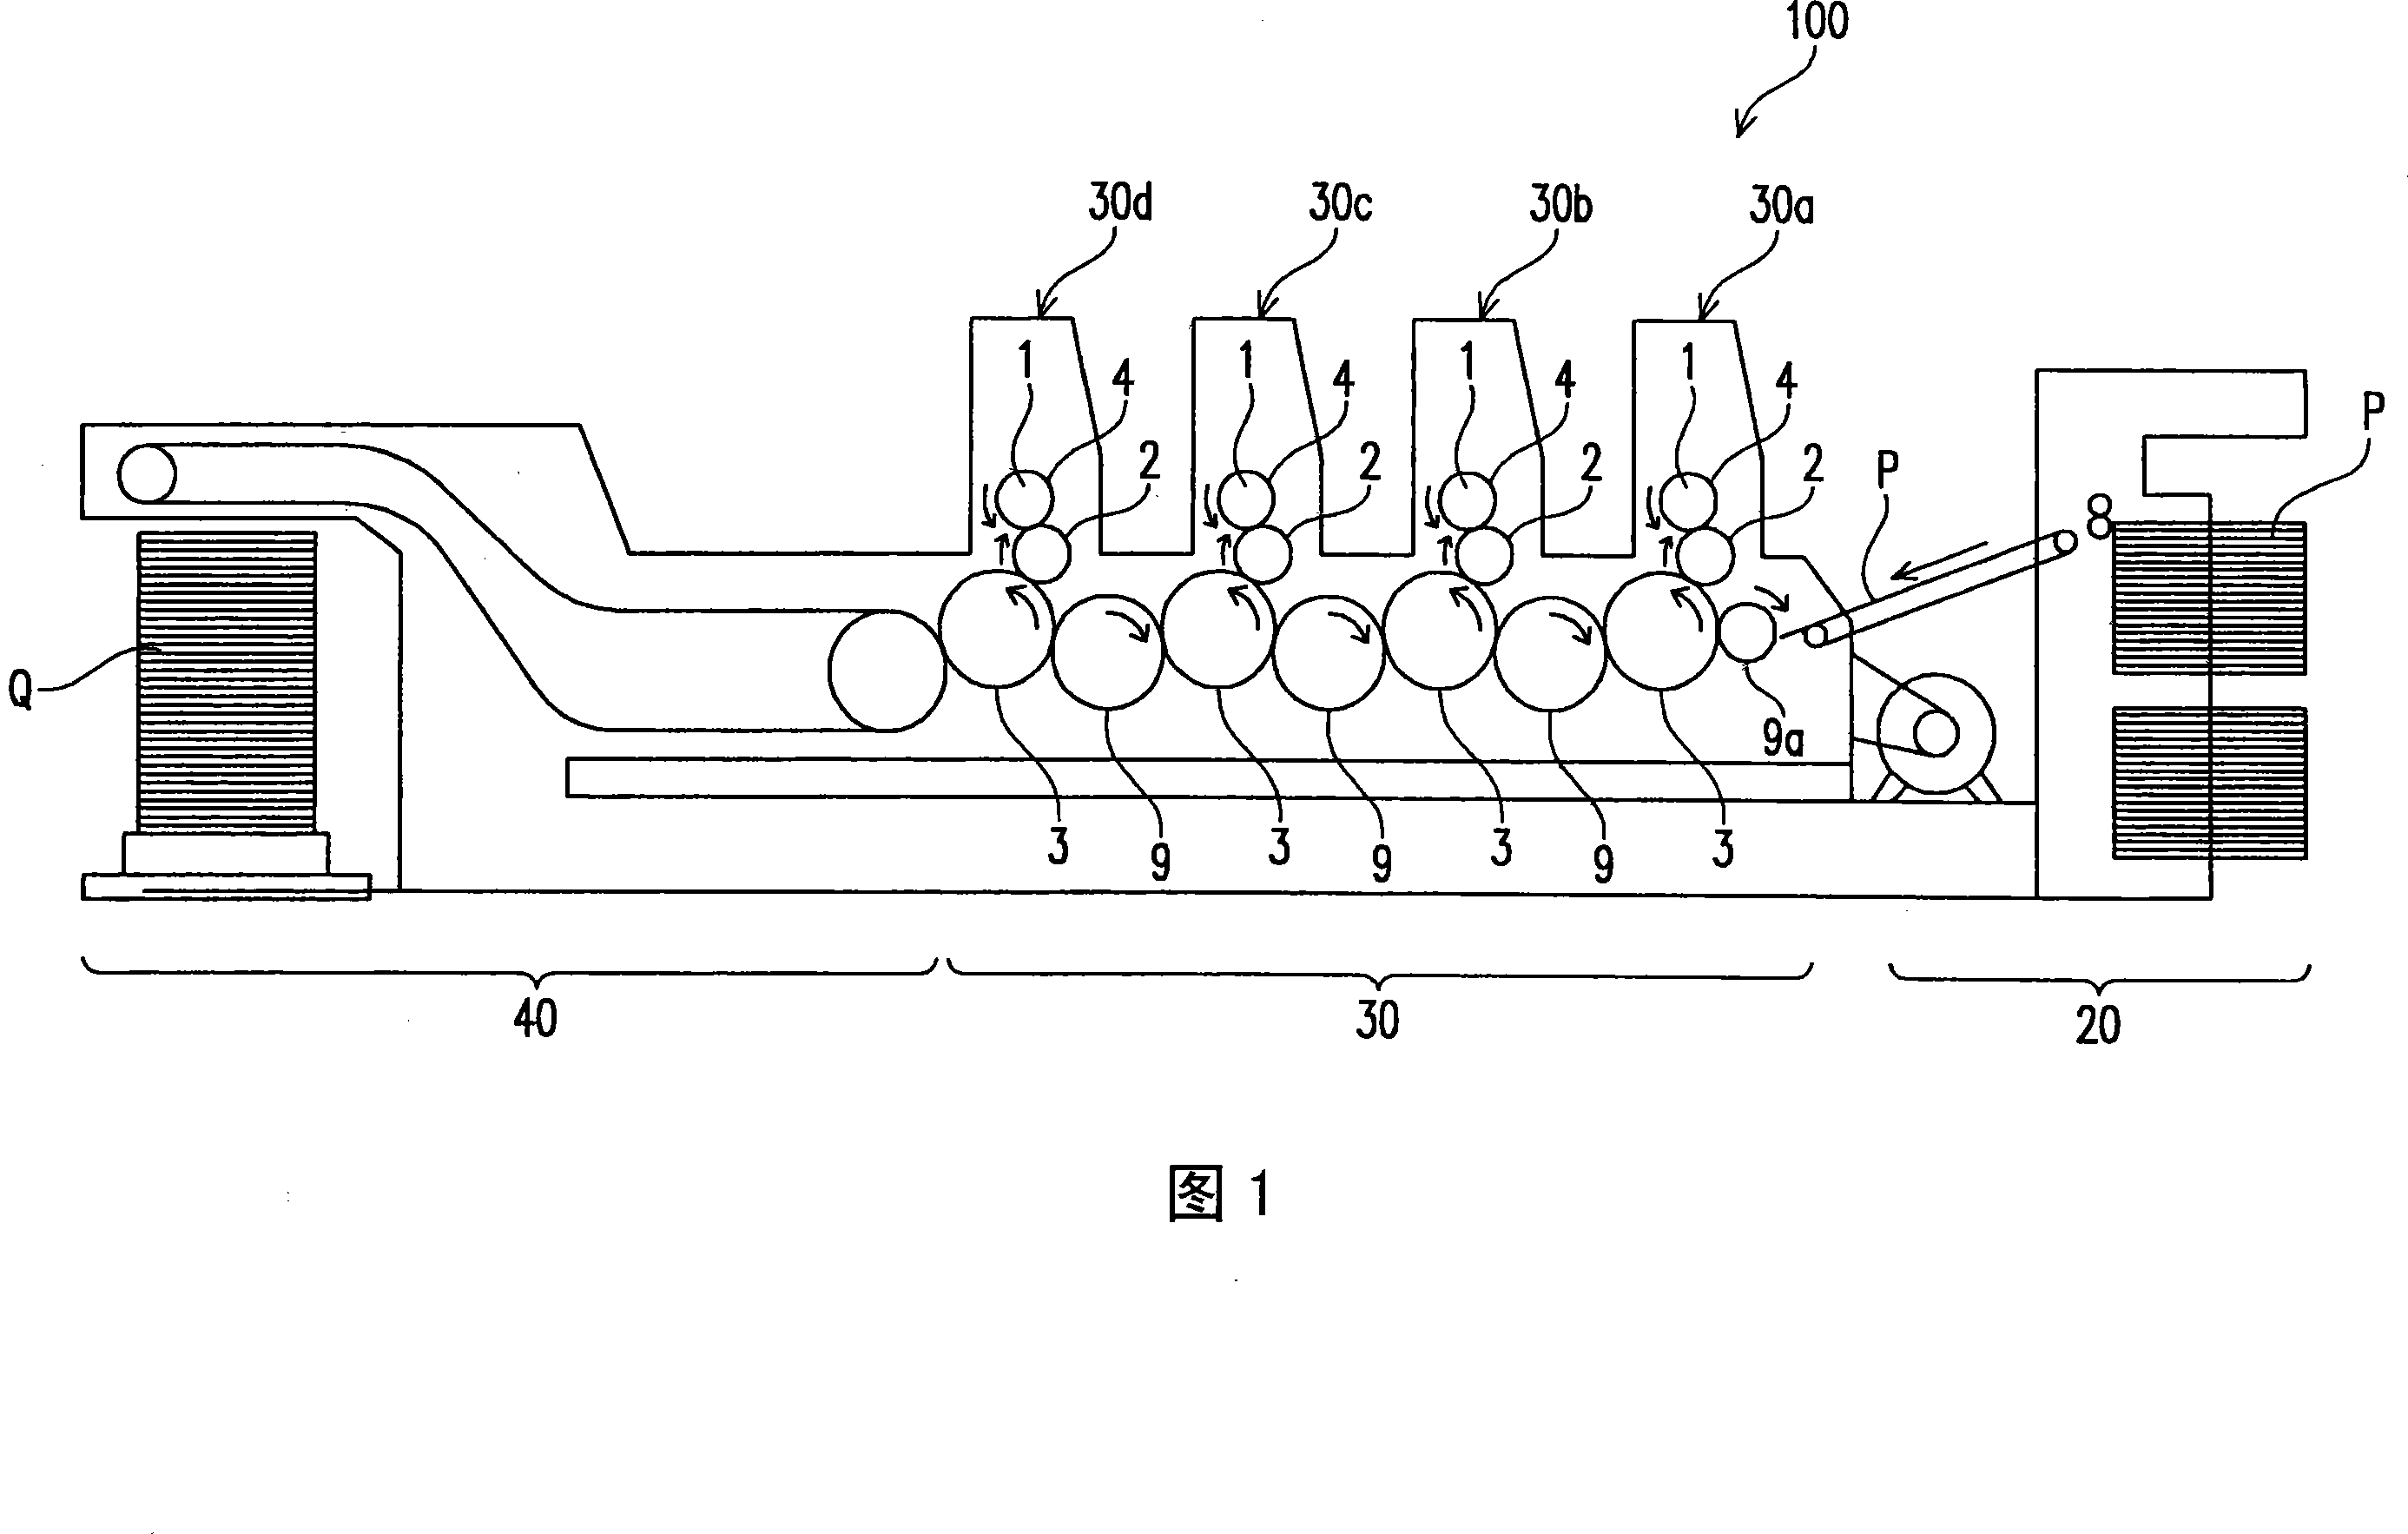 Method of controlling quality of printed images of color printing press and apparatus for controlling quality of printed images